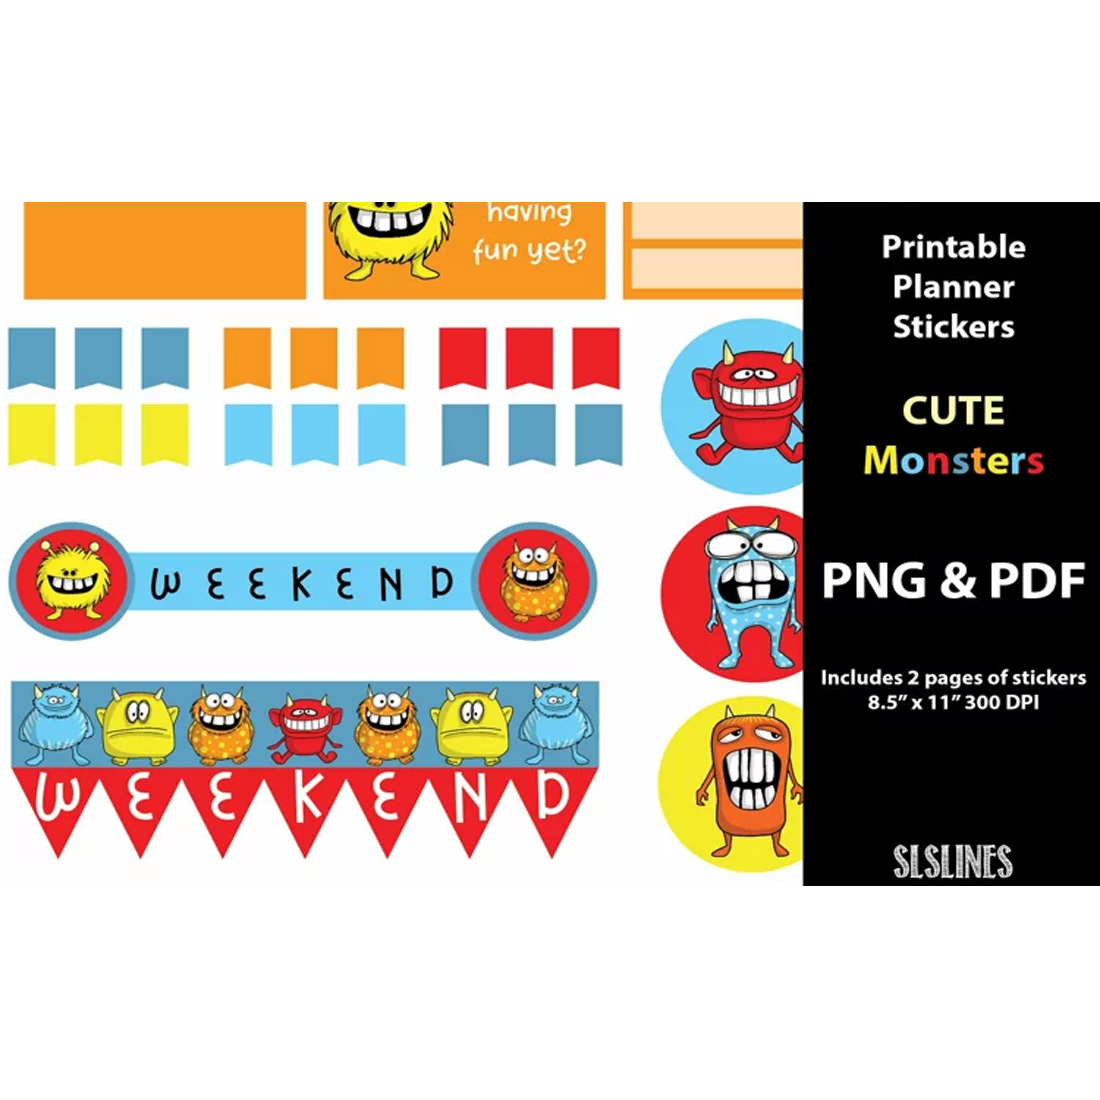 Printable Planner Stickers - Cute Monsters preview image.